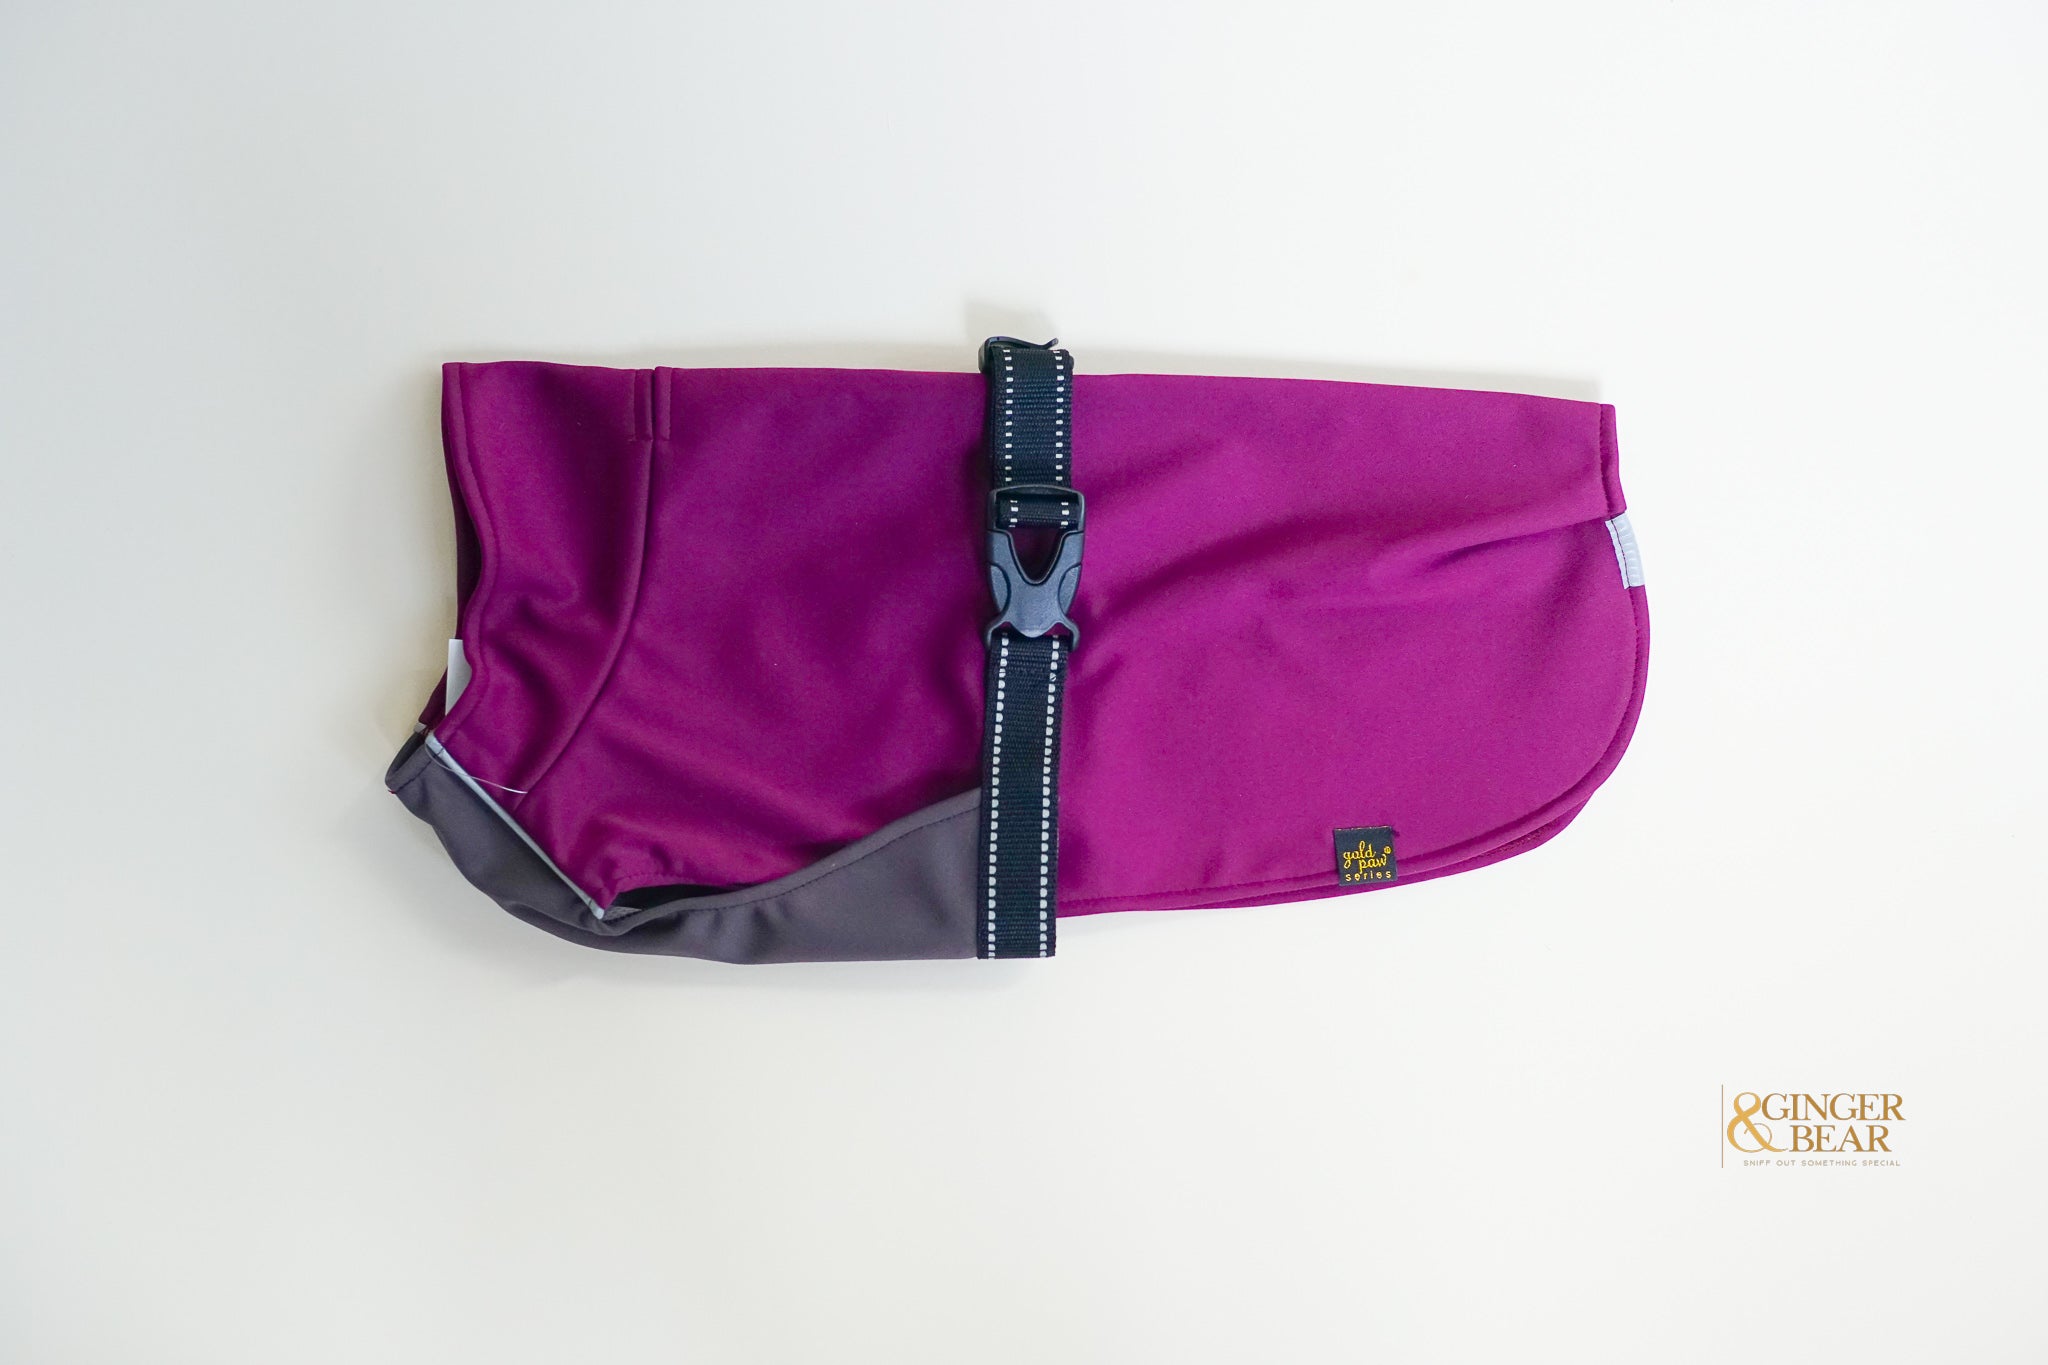 The Rain Paw, raincoat for Dogs, in Beetroot and Graphite